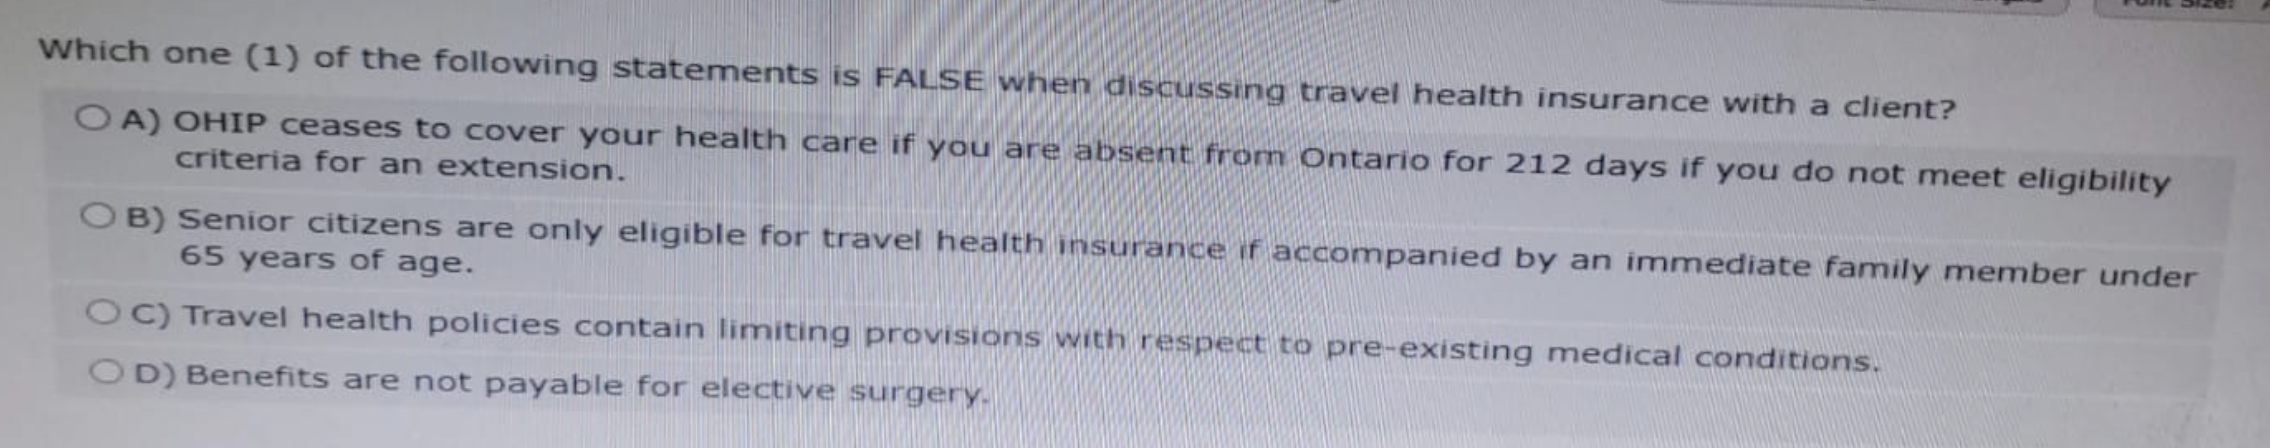 Which one (1) of the following statements is FALSE when discussing travel health insurance with a client?
OA) OHIP ceases to cover your health care if you are absent from Ontario for 212 days if you do not meet eligibility
criteria for an extension.
OB) Senior citizens are only eligible for travel health insurance if accompanied by an immediate family member under
65 years of age.
OC) Travel health policies contain limiting provisions with respect to pre-existing medical conditions.
OD) Benefits are not payable for elective surgery.